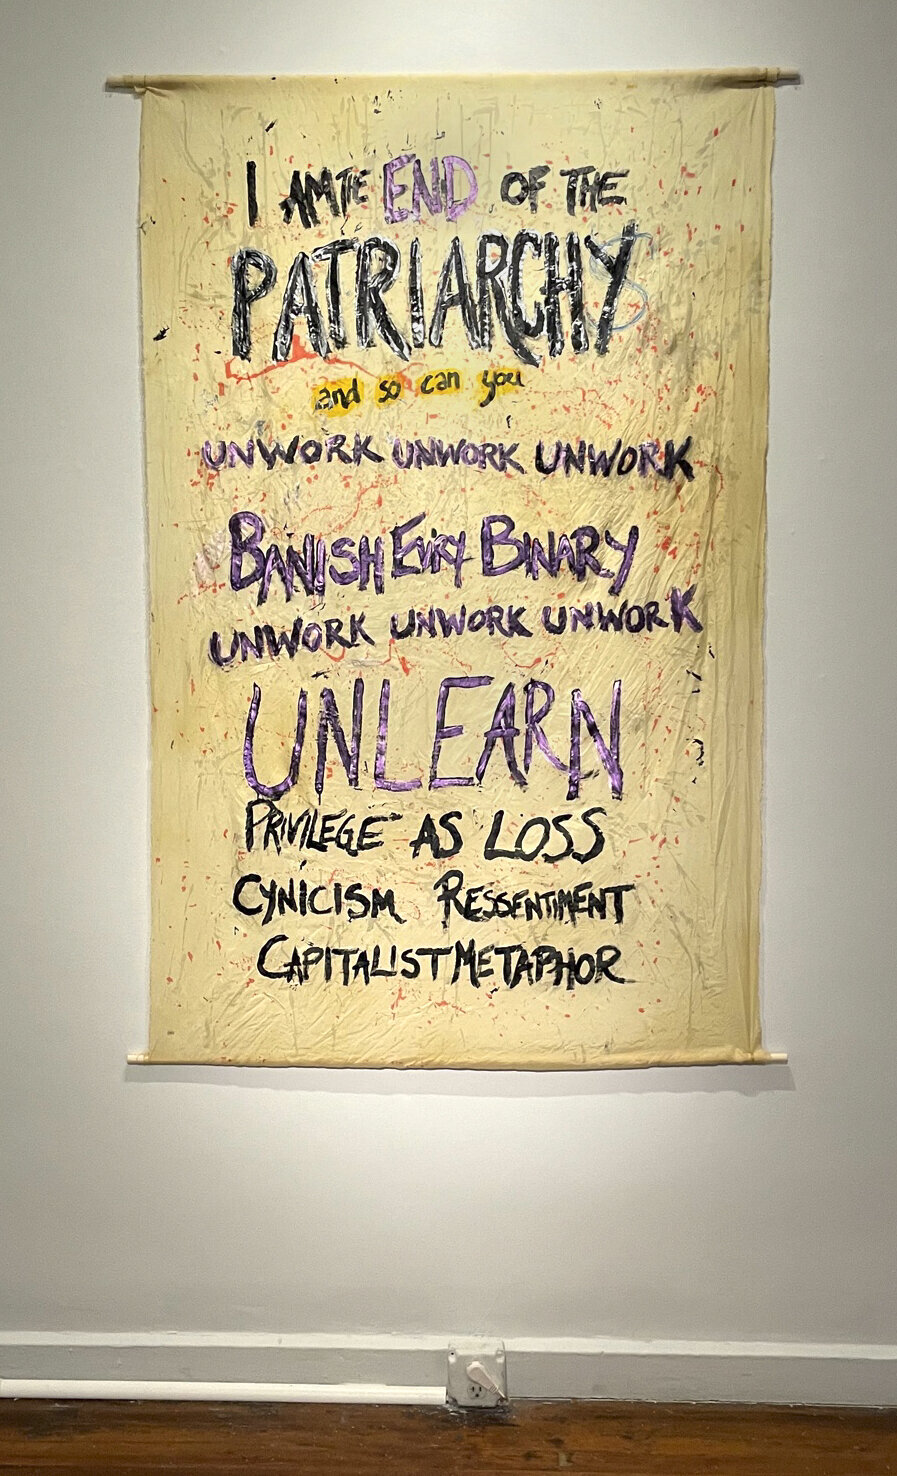    RAHNE ALEXANDER     I Am the End of the Patriarchy and So Can You   (center panel) Paint on silk 